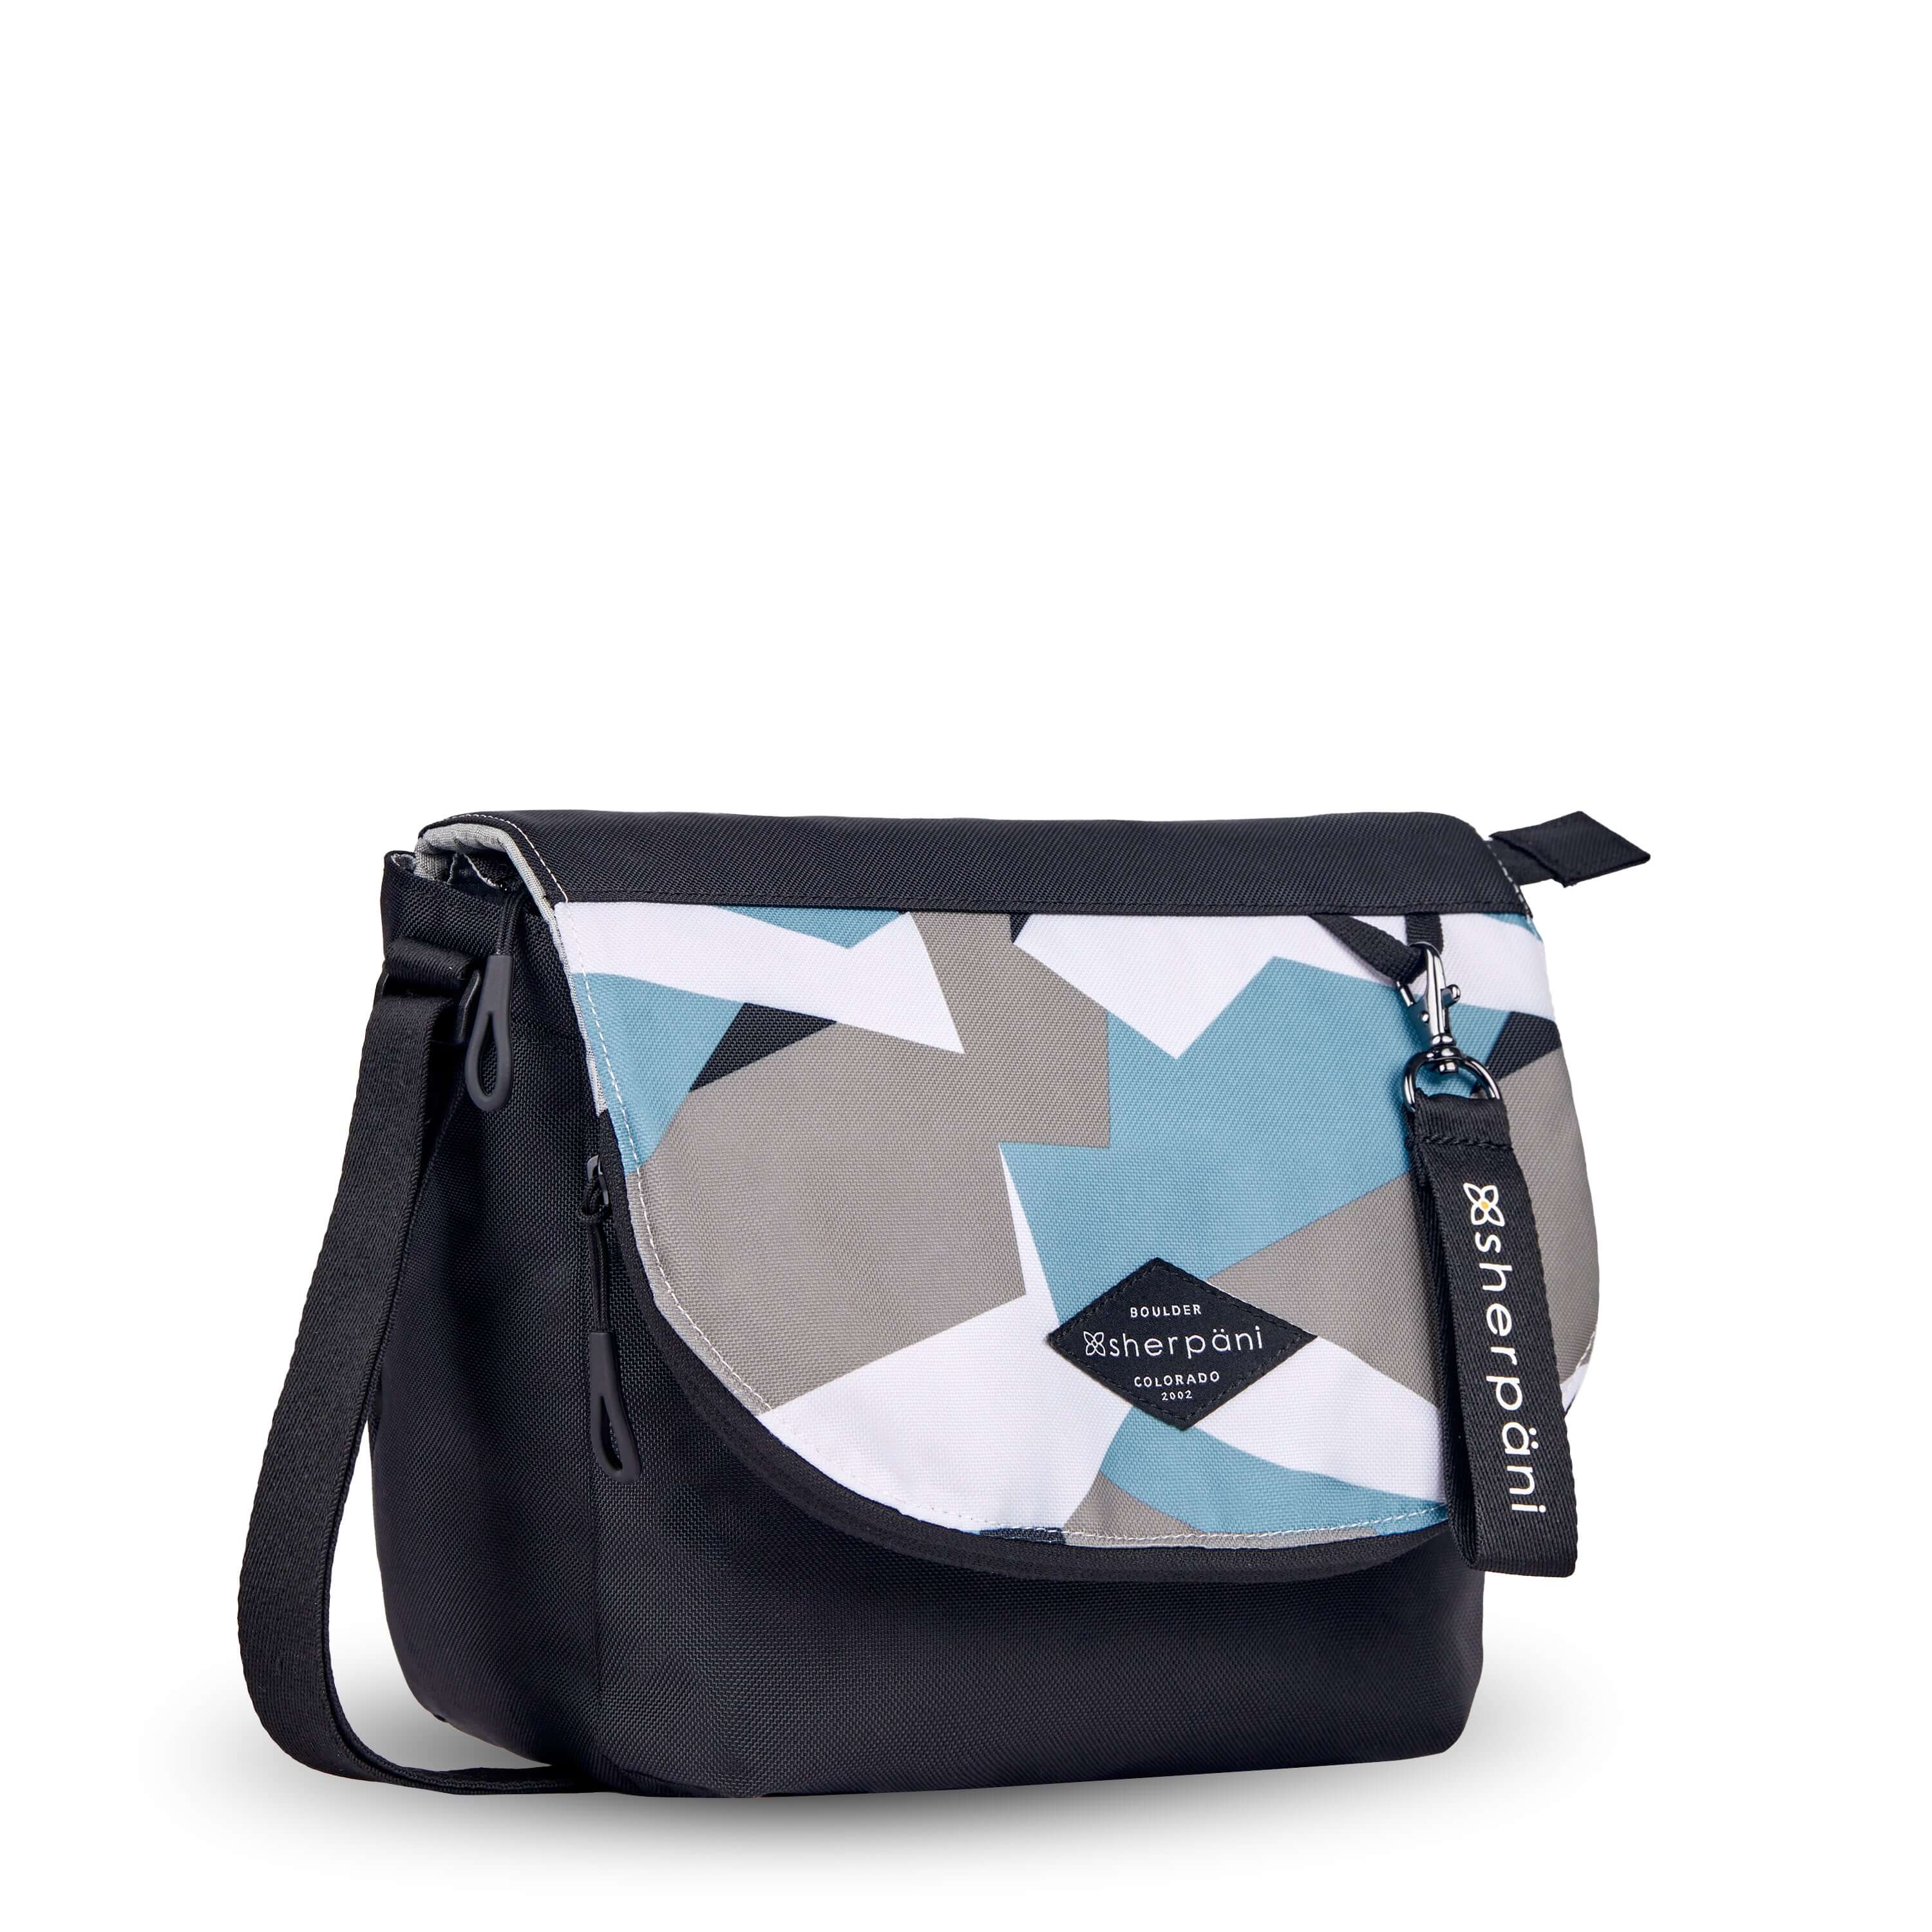 Angled front view of Sherpani crossbody, the Milli in Summer Camo. The messenger style bag is two-toned: the layover flap is a camouflage pattern of light blue, gray and white, the remainder of the bag is black. Easy-pull zippers are accented in black. The bag has an adjustable crossbody strap. A branded Sherpani keychain is clipped to a fabric loop in the upper right corner.